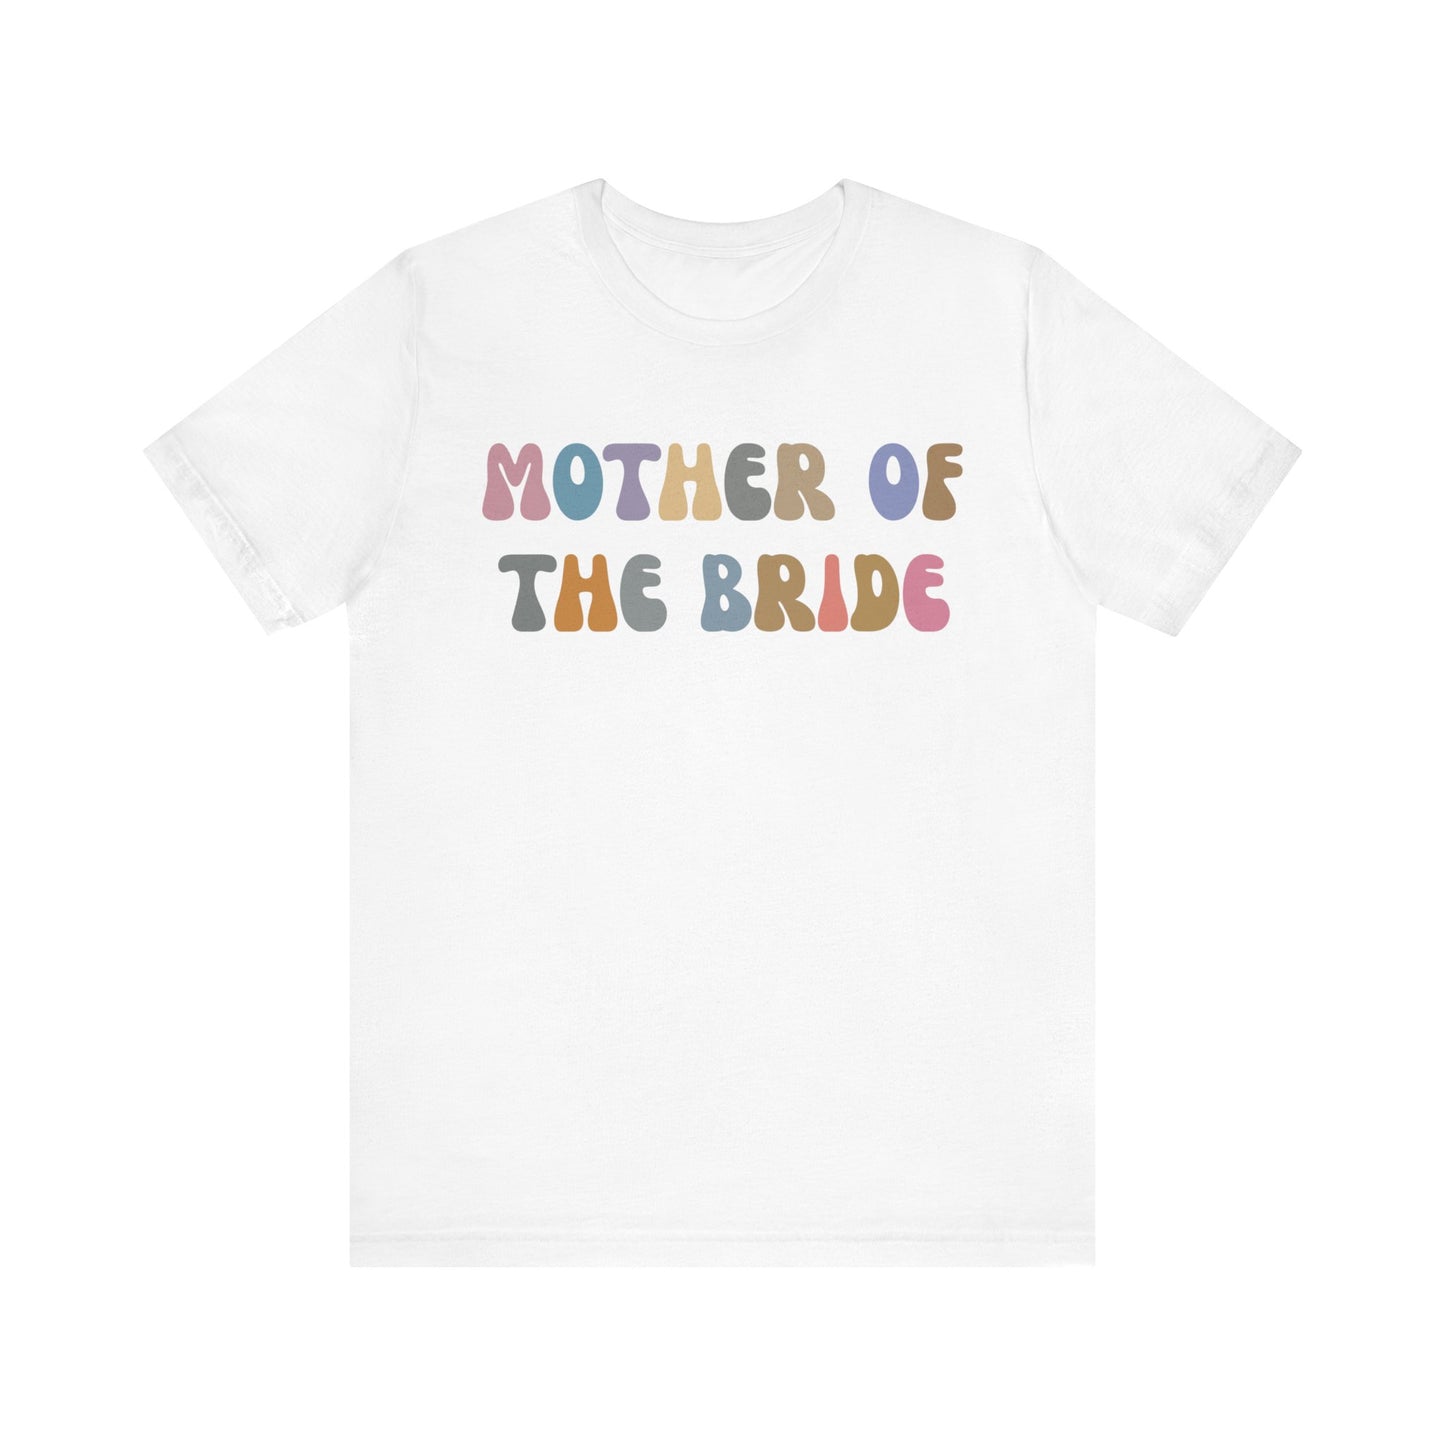 Mother of the Bride Shirt, Cute Wedding Gift from Daughter, Engagement Gift, Retro Wedding Gift for Mom, Bridal Party Shirt for Mom, T1144